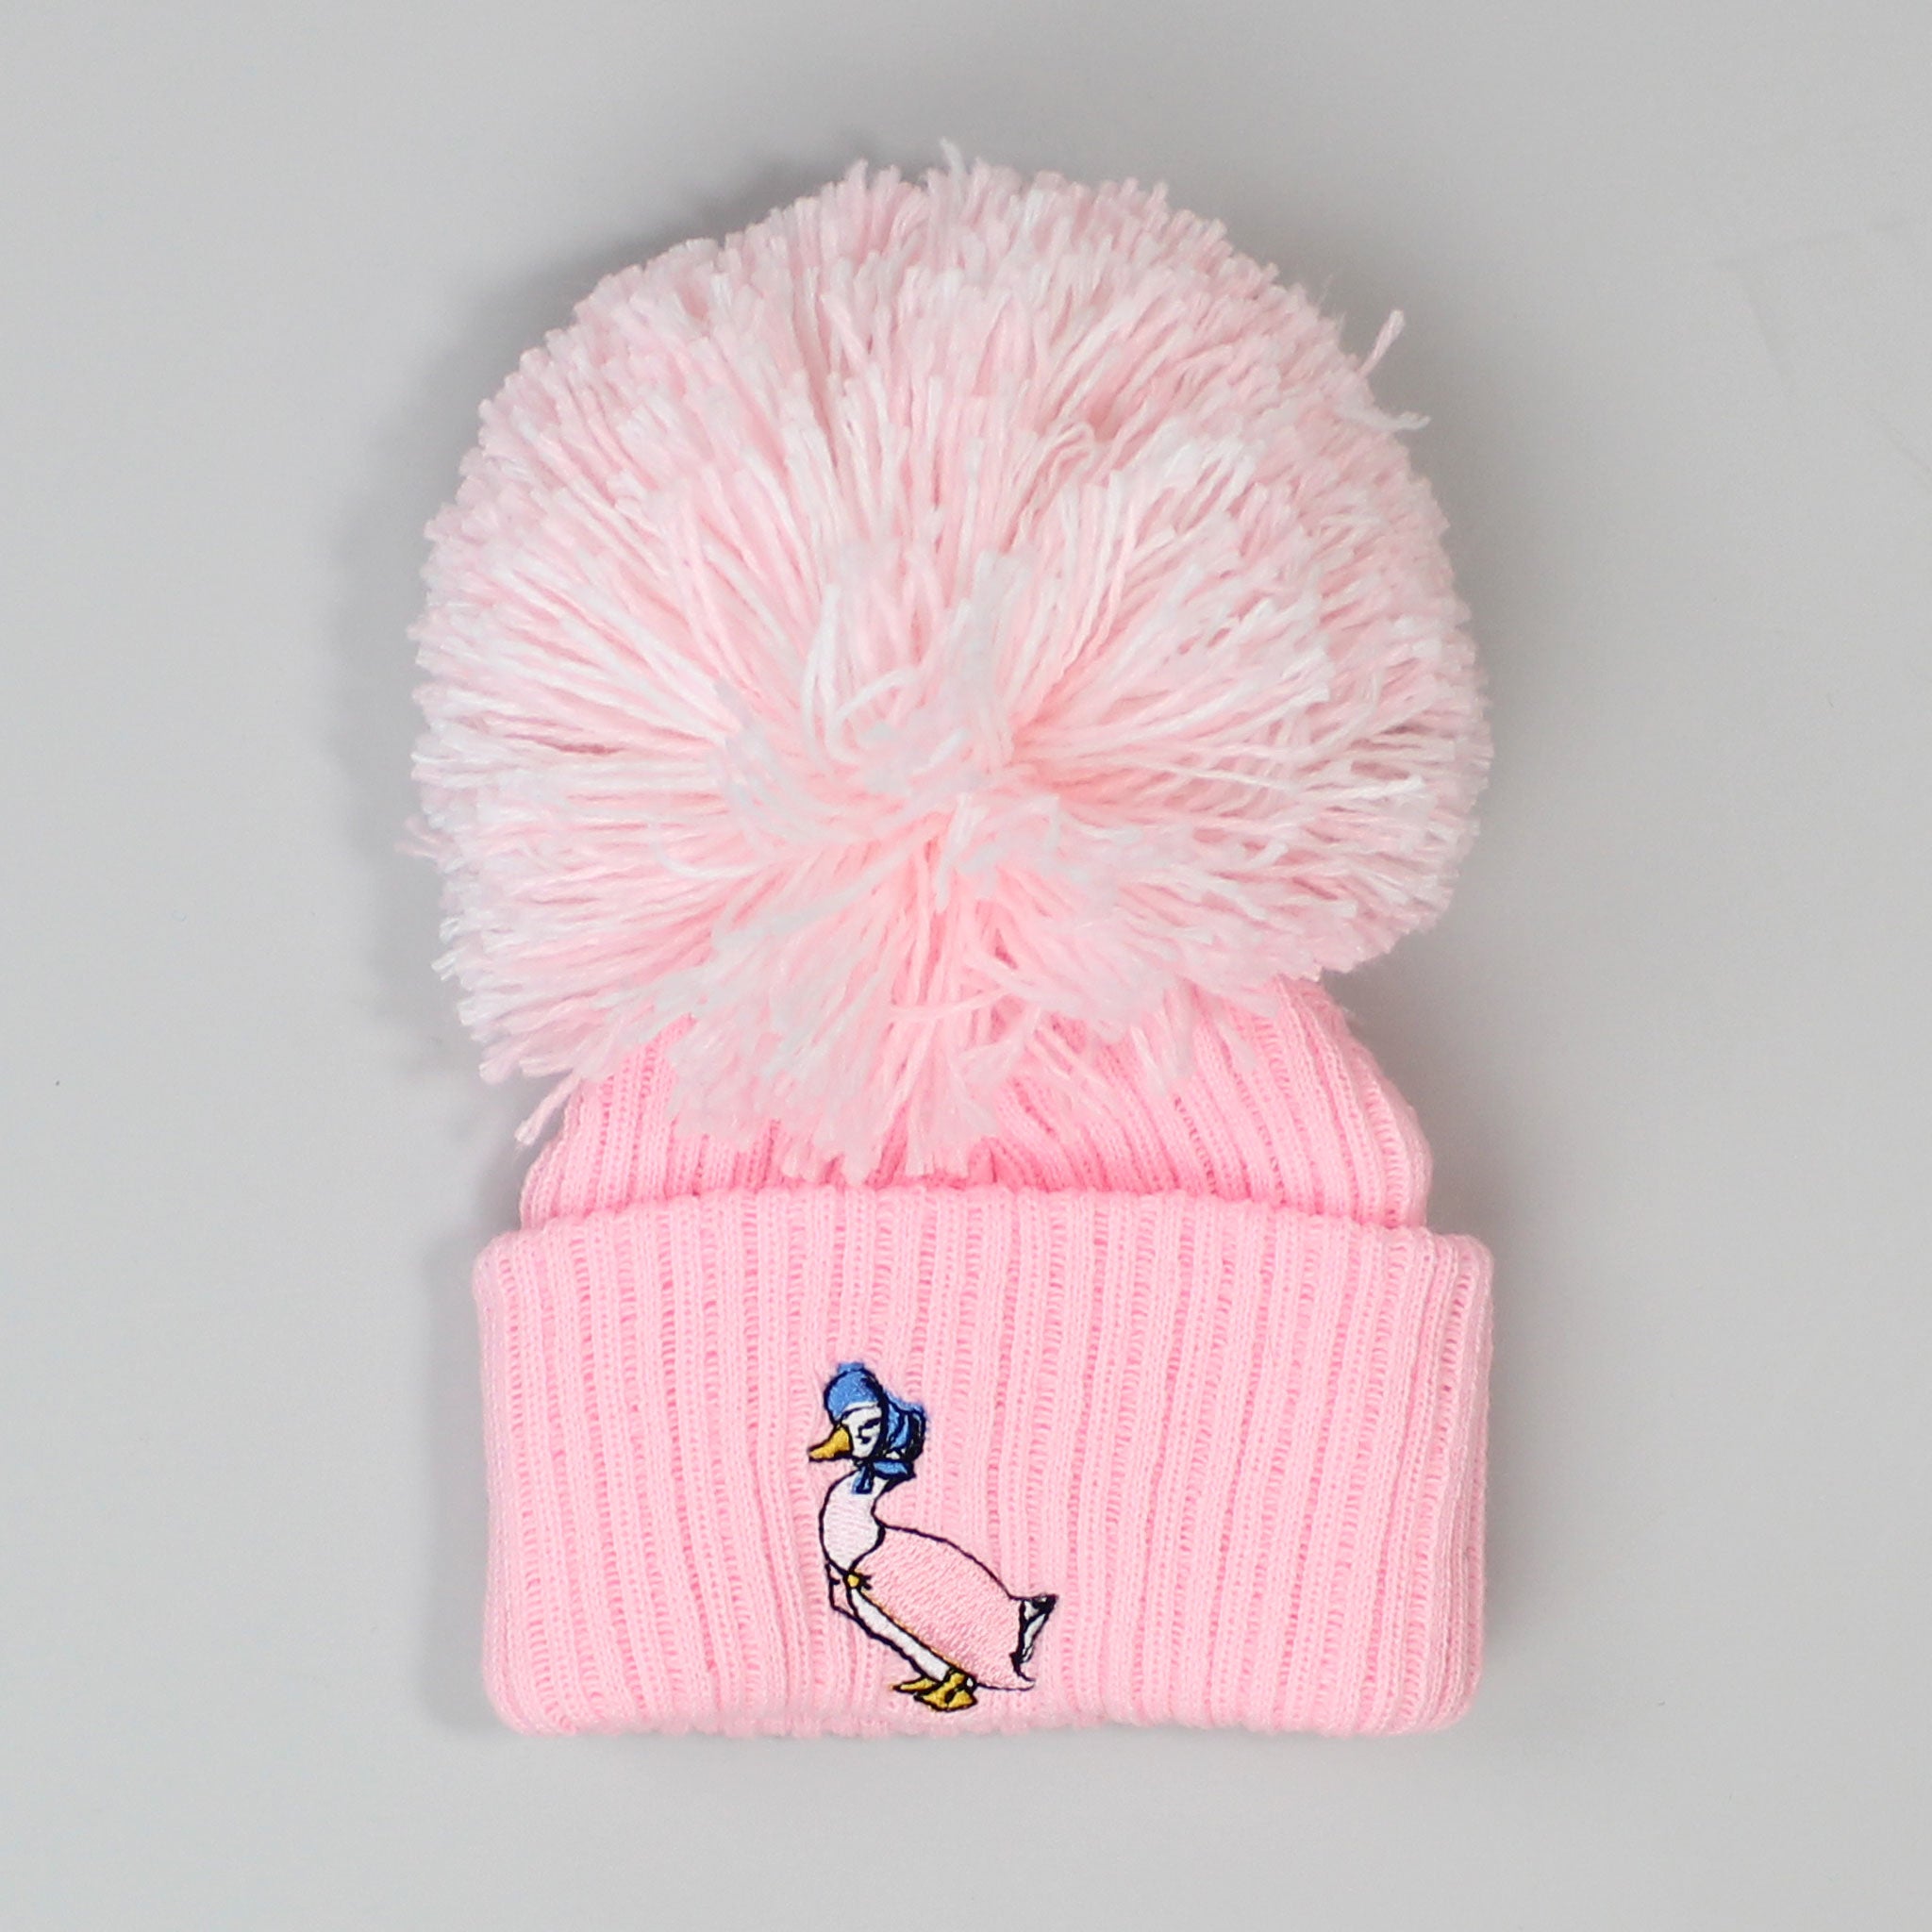 Pink Baby Pom Pom Hat with duck embroidery